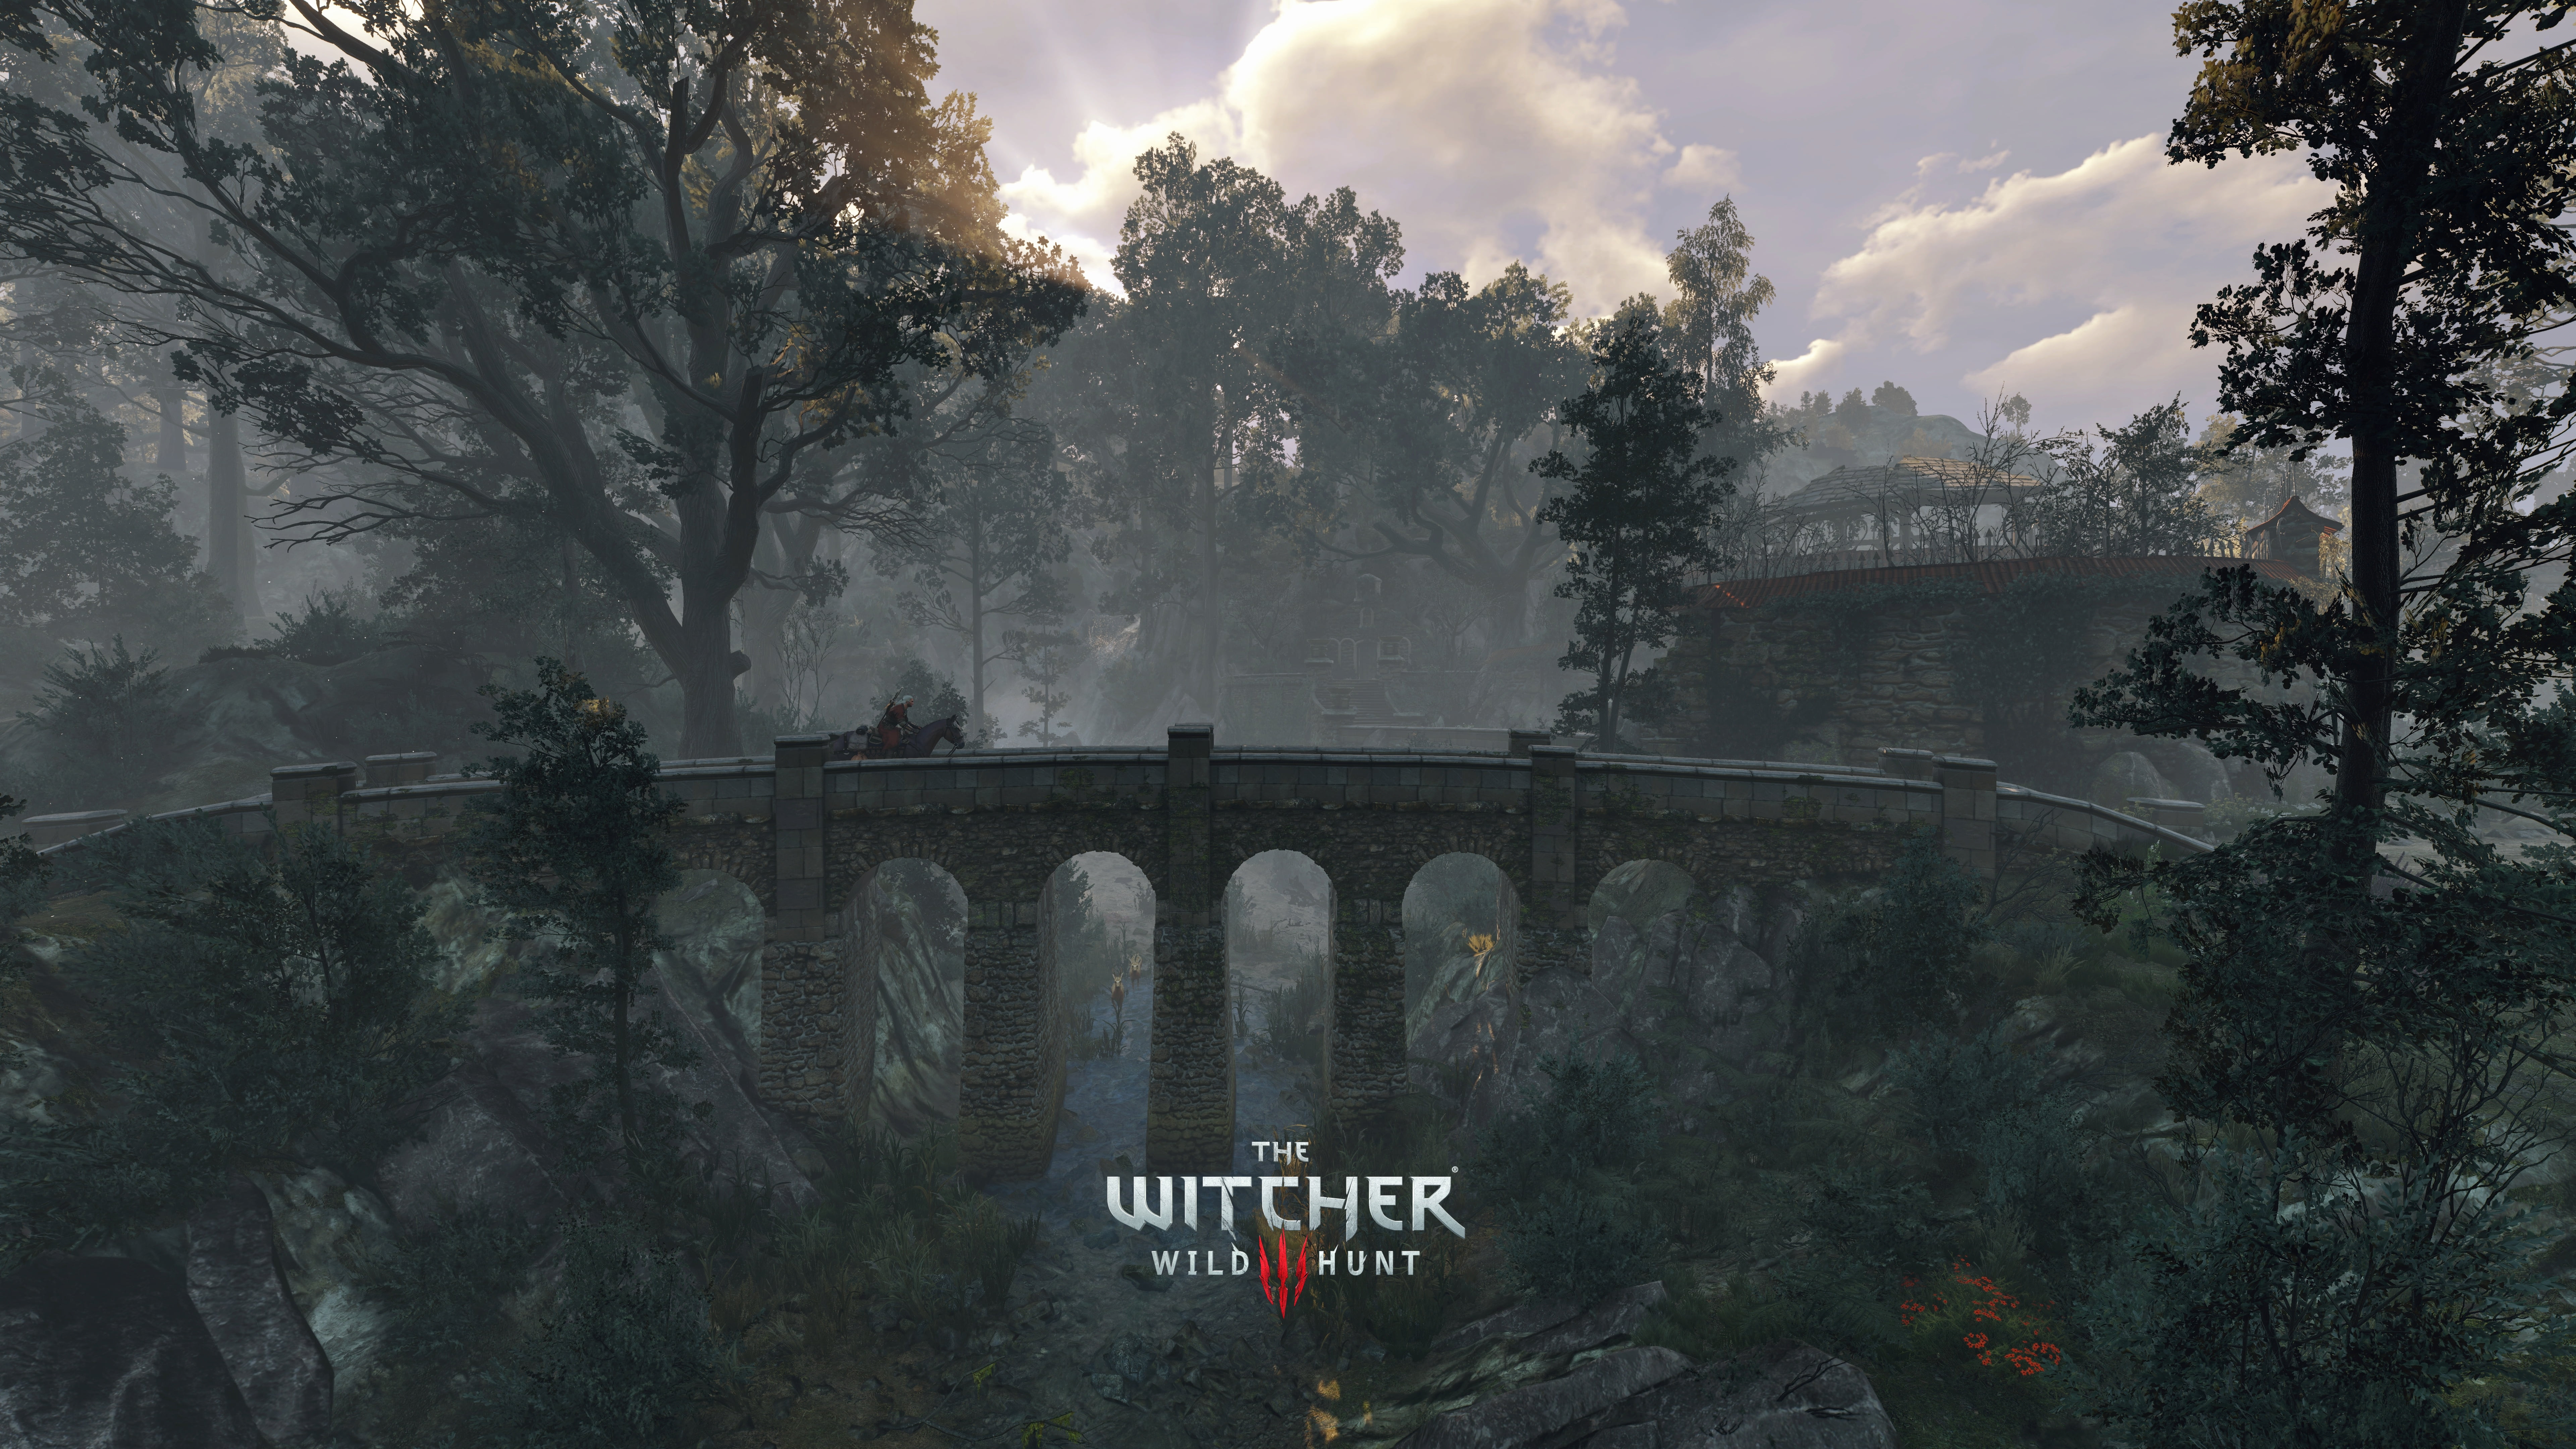 The Witcher, DLC, CD Projekt RED, The Witcher 3: Wild Hunt